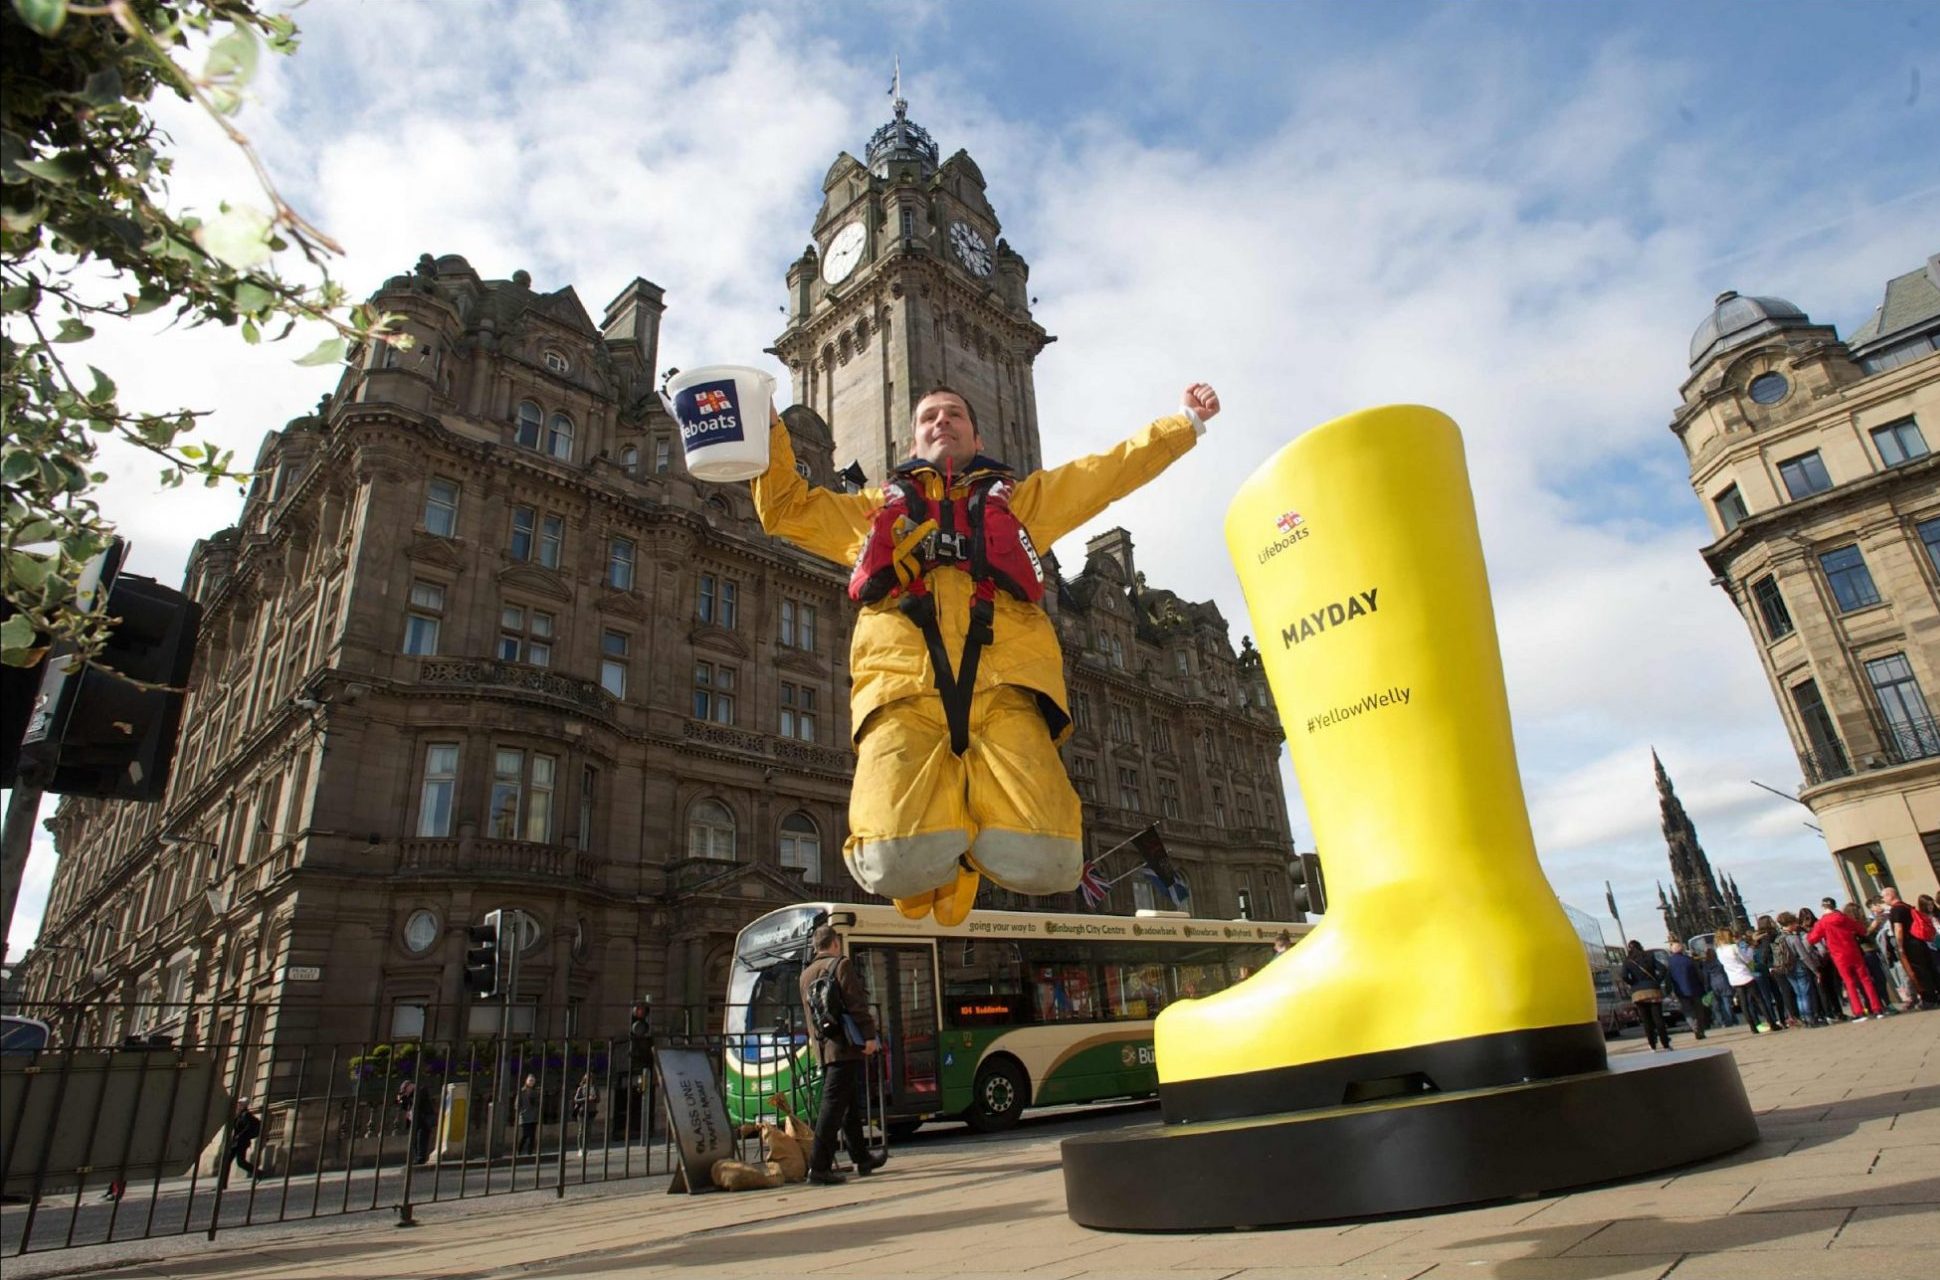 FREE TO USE - Giant yellow wellies kick off RNLI’s Mayday campaign